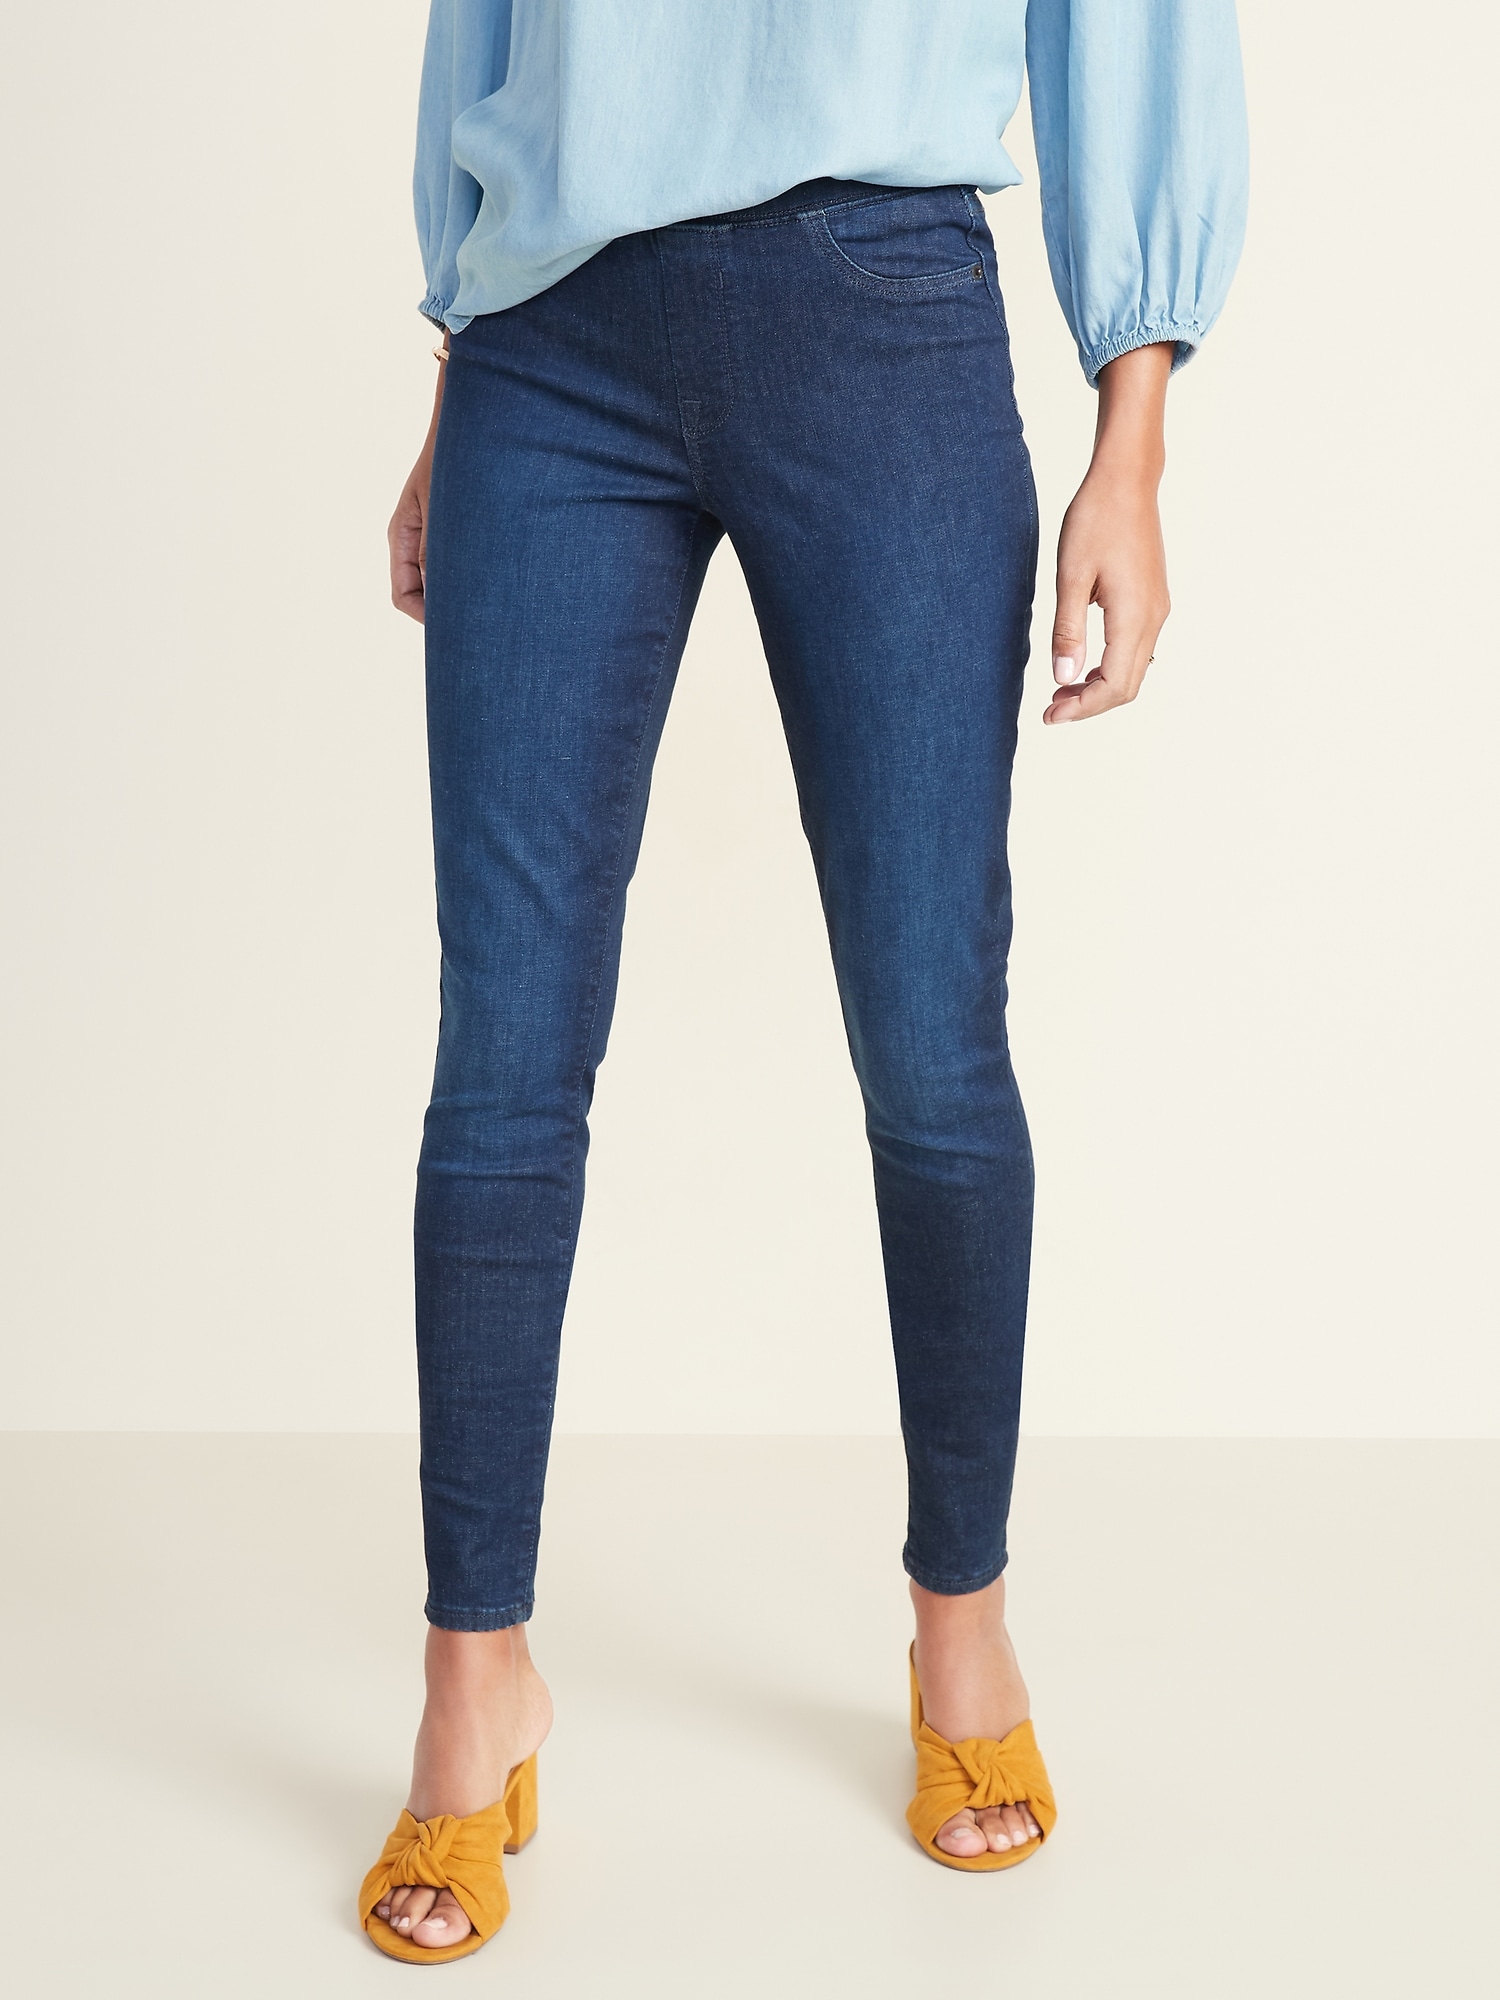 old navy high rise jeggings